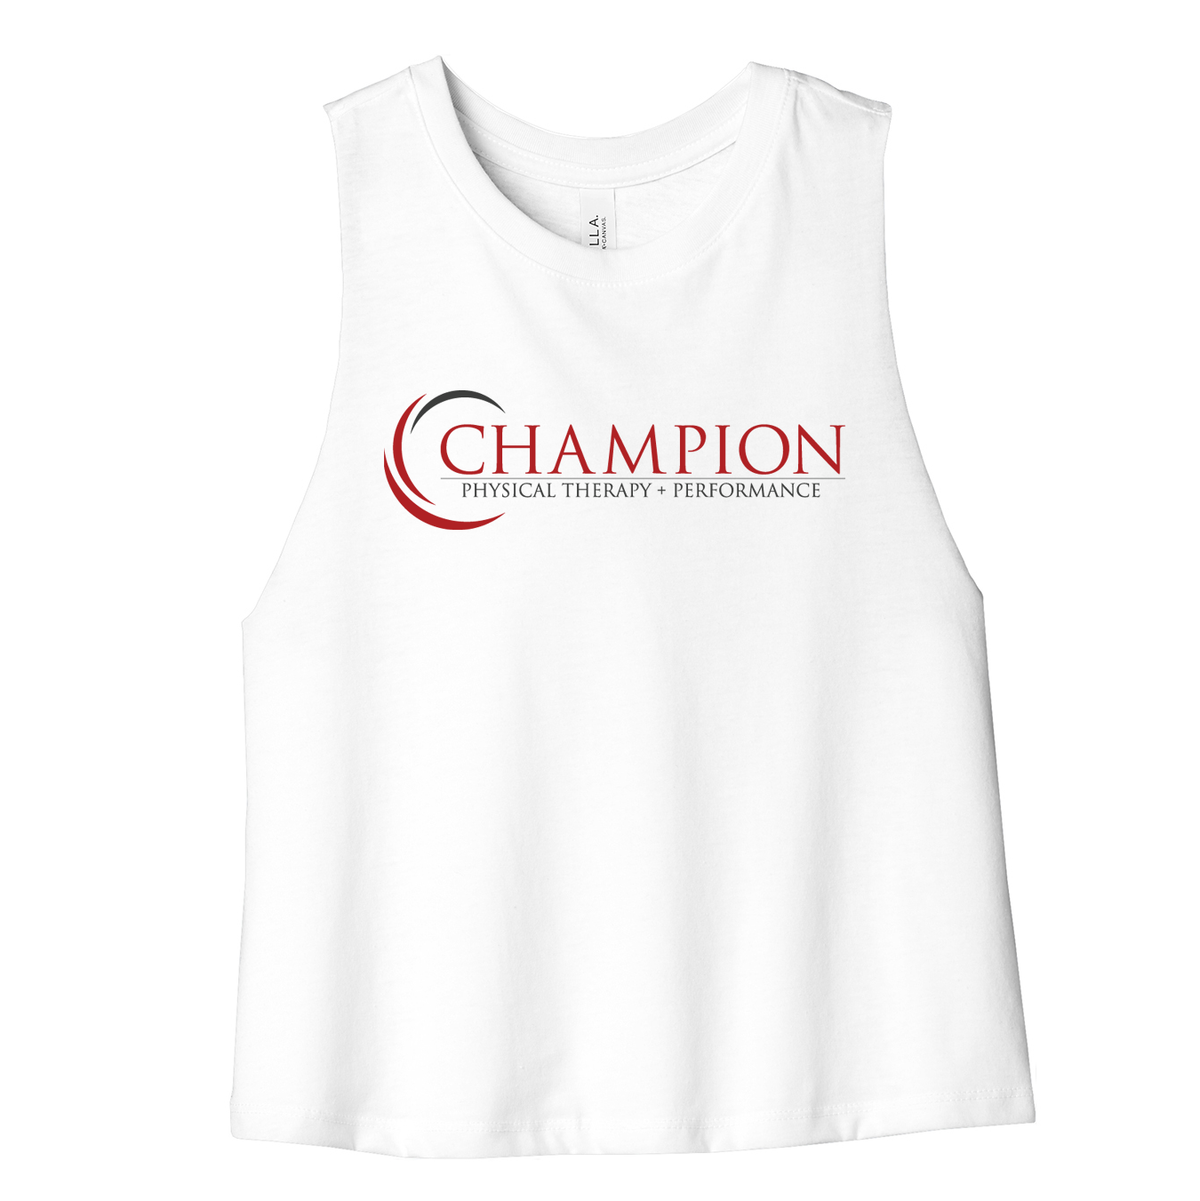 Champion Physical Therapy Women’s Racerback Cropped Tank